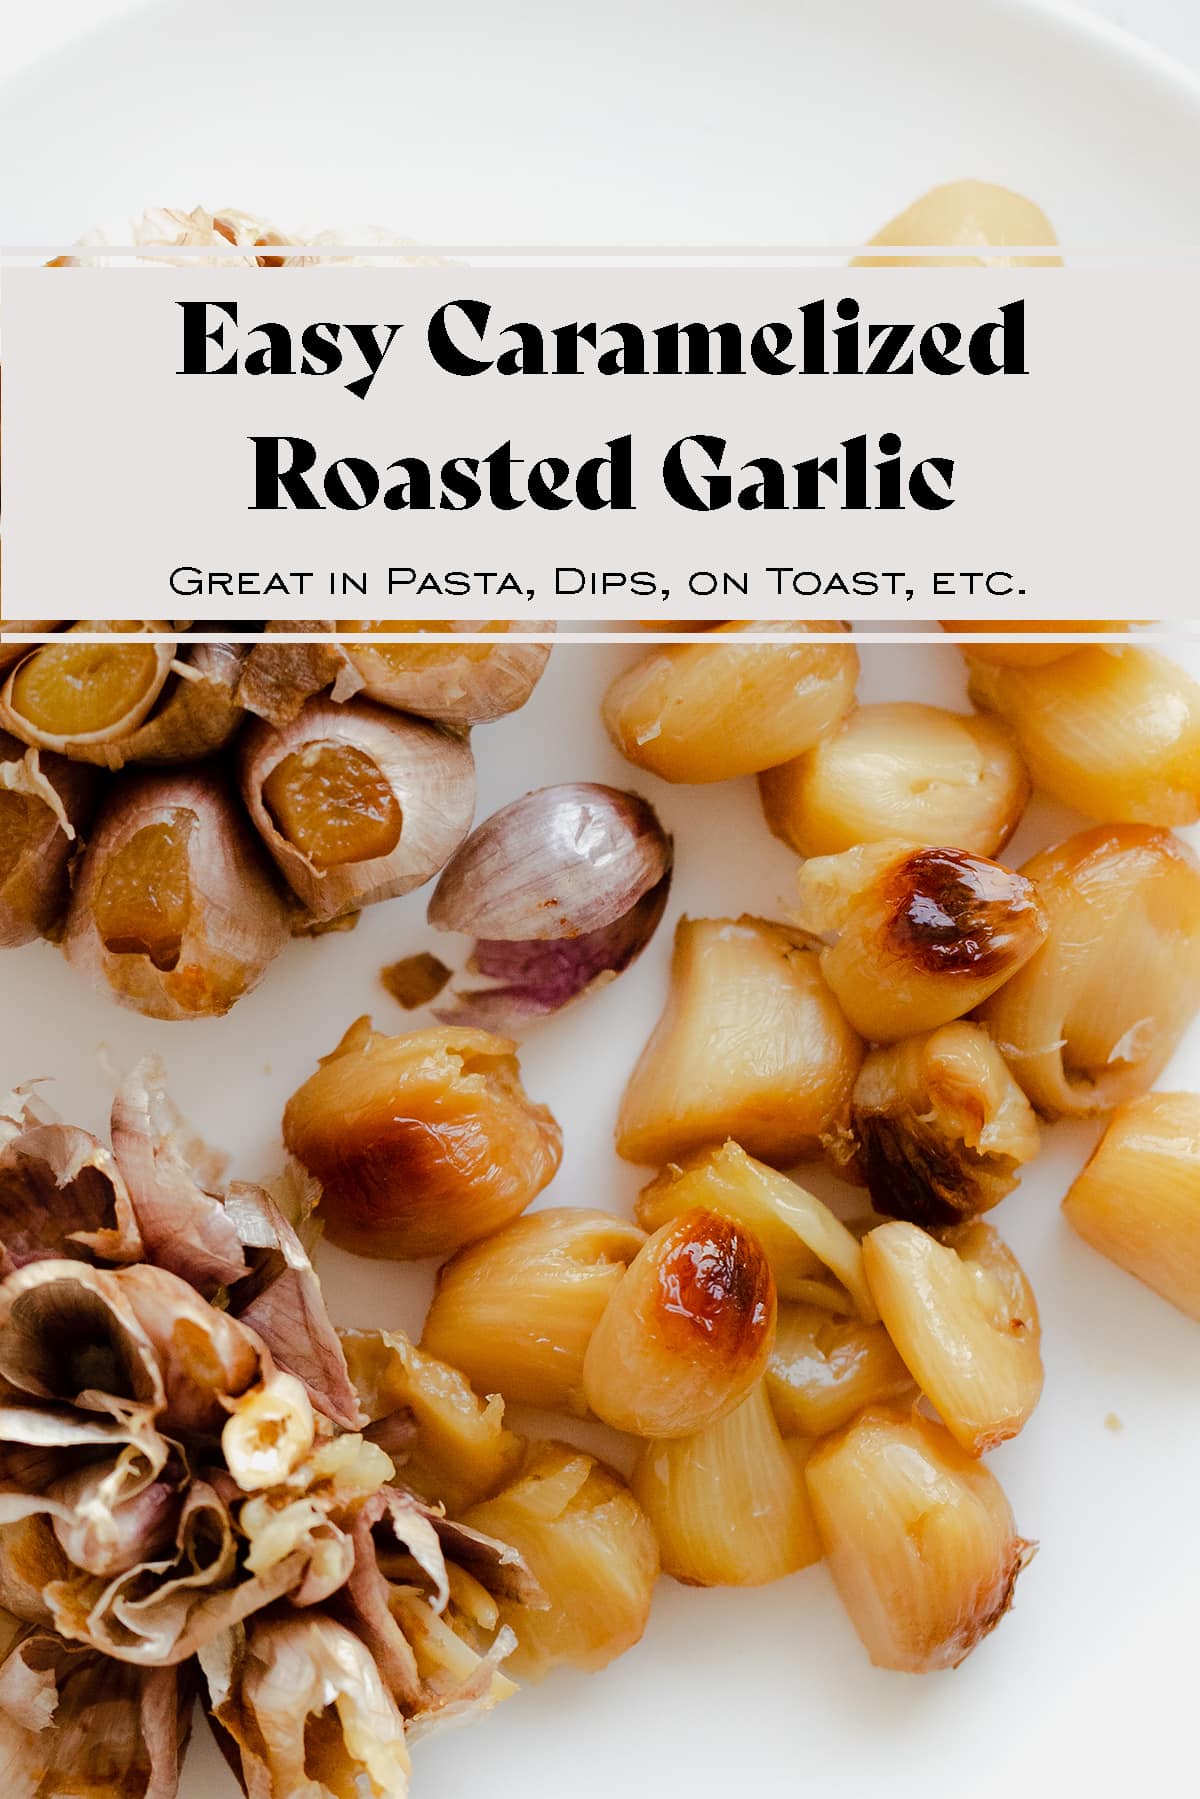 How to Roast Garlic in the Oven